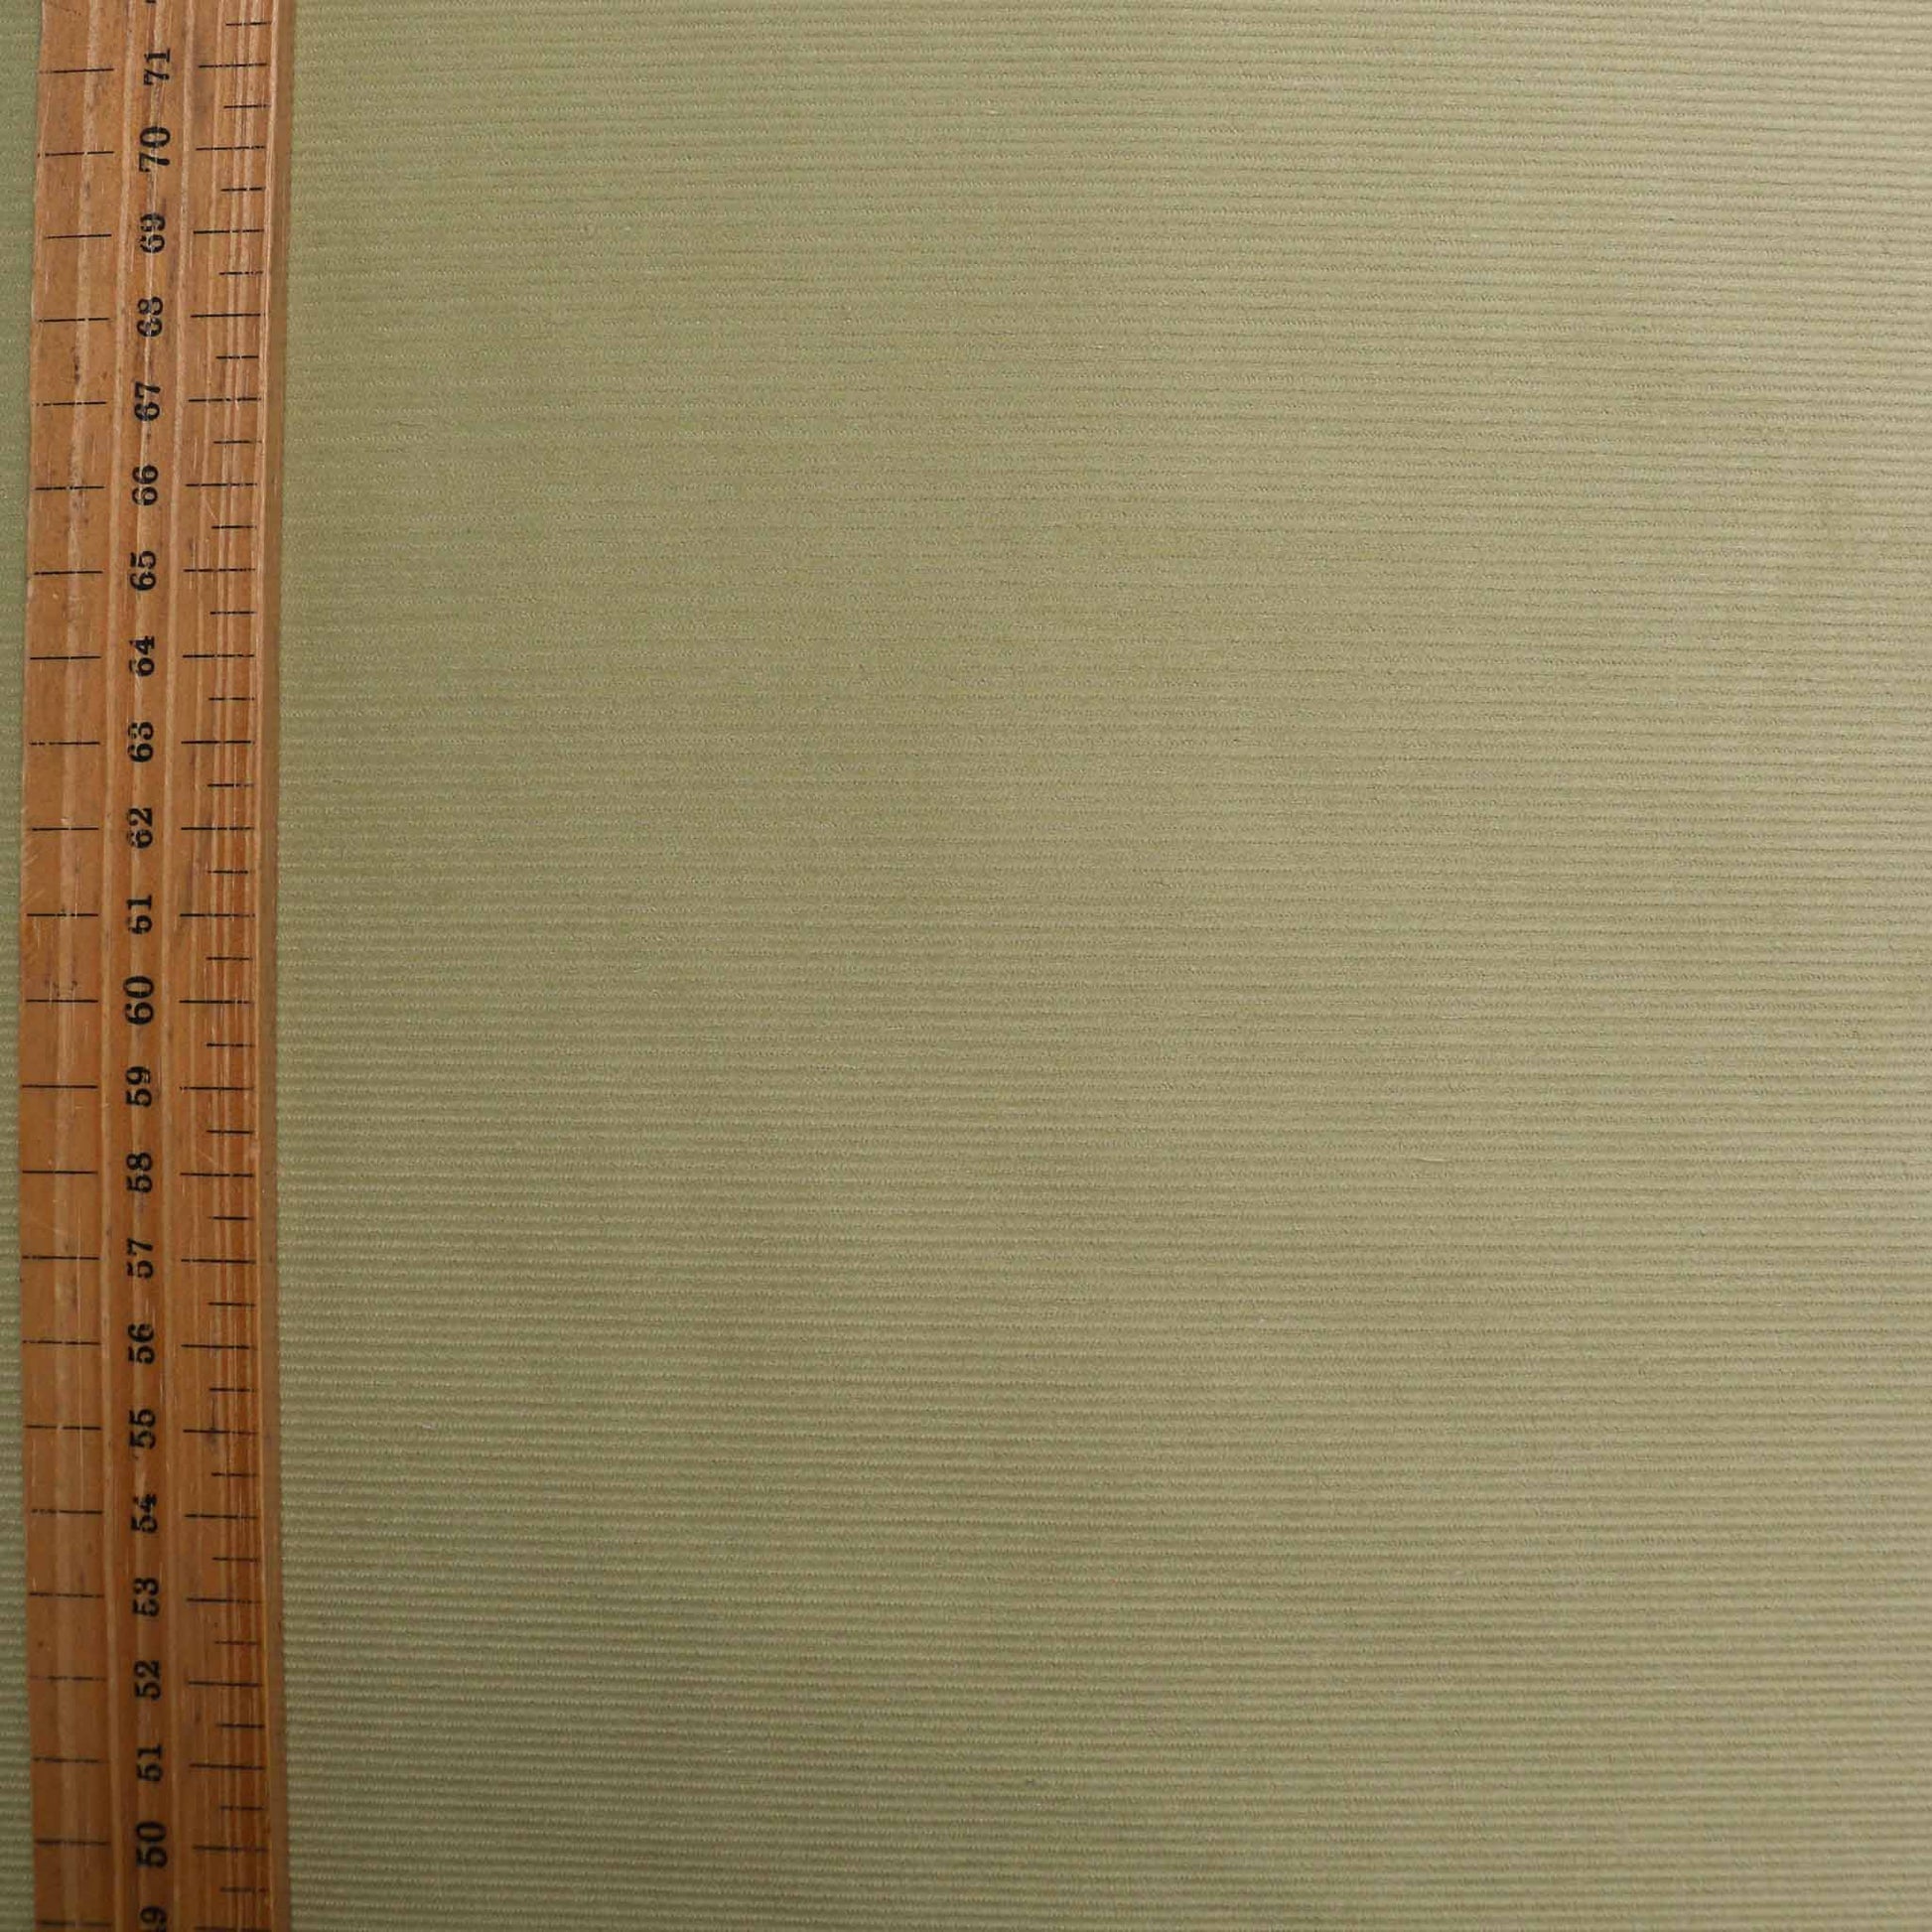 vintage lime green pure cotton needlecord dressmaking fabric